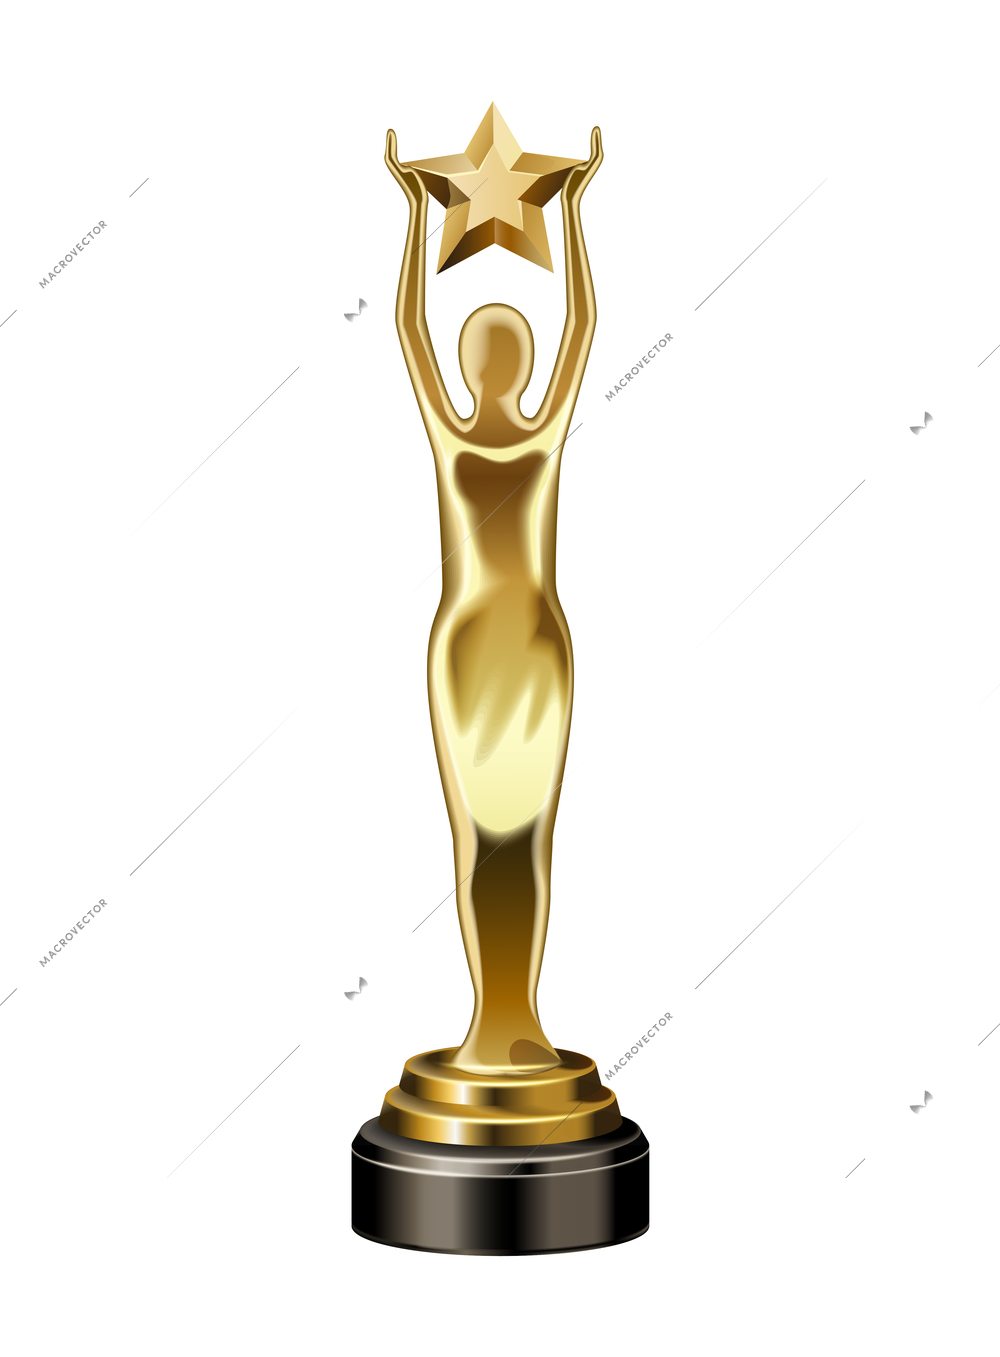 Award medal realistic composition with isolated image of golden statuette prize on blank background vector illustration